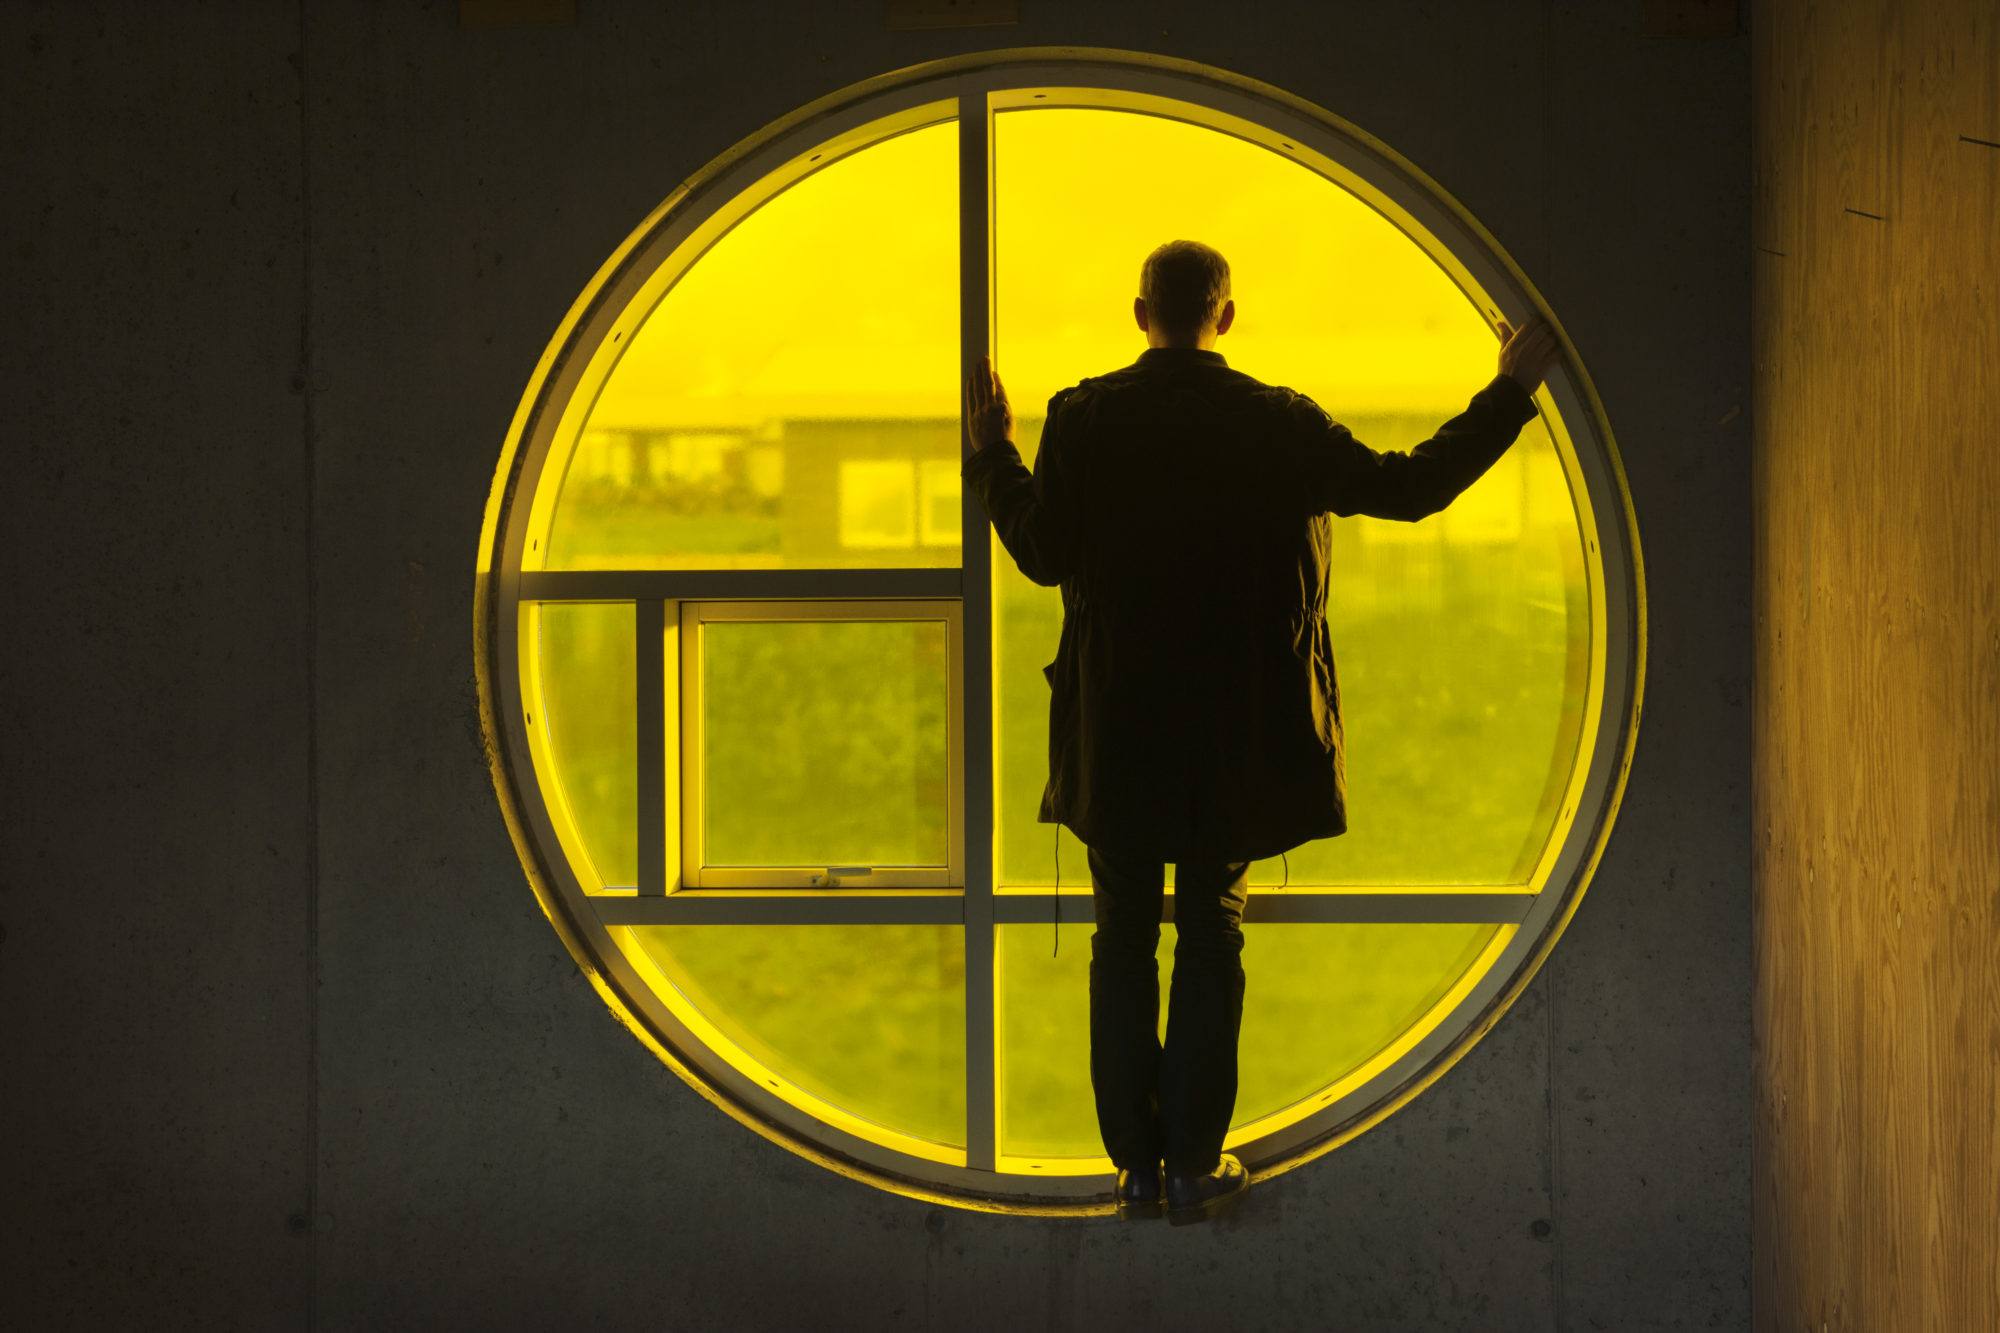 Man looking out of a yellow circular window with geometric pattern